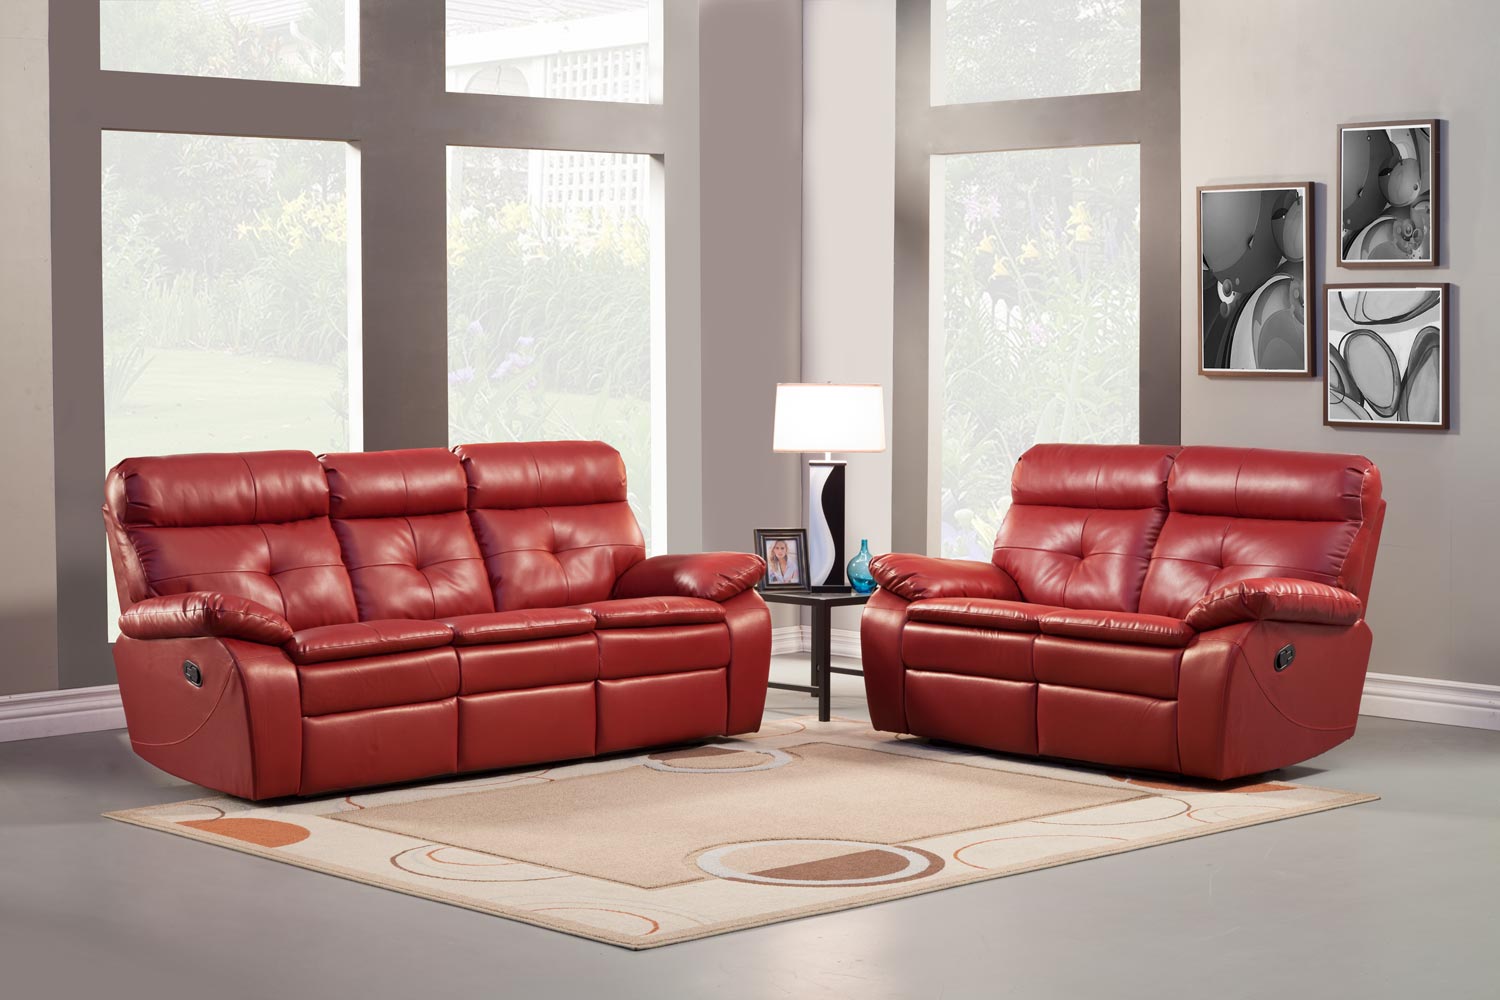 Homelegance Wallace Reclining Sofa Set - Red - Bonded Leather Match